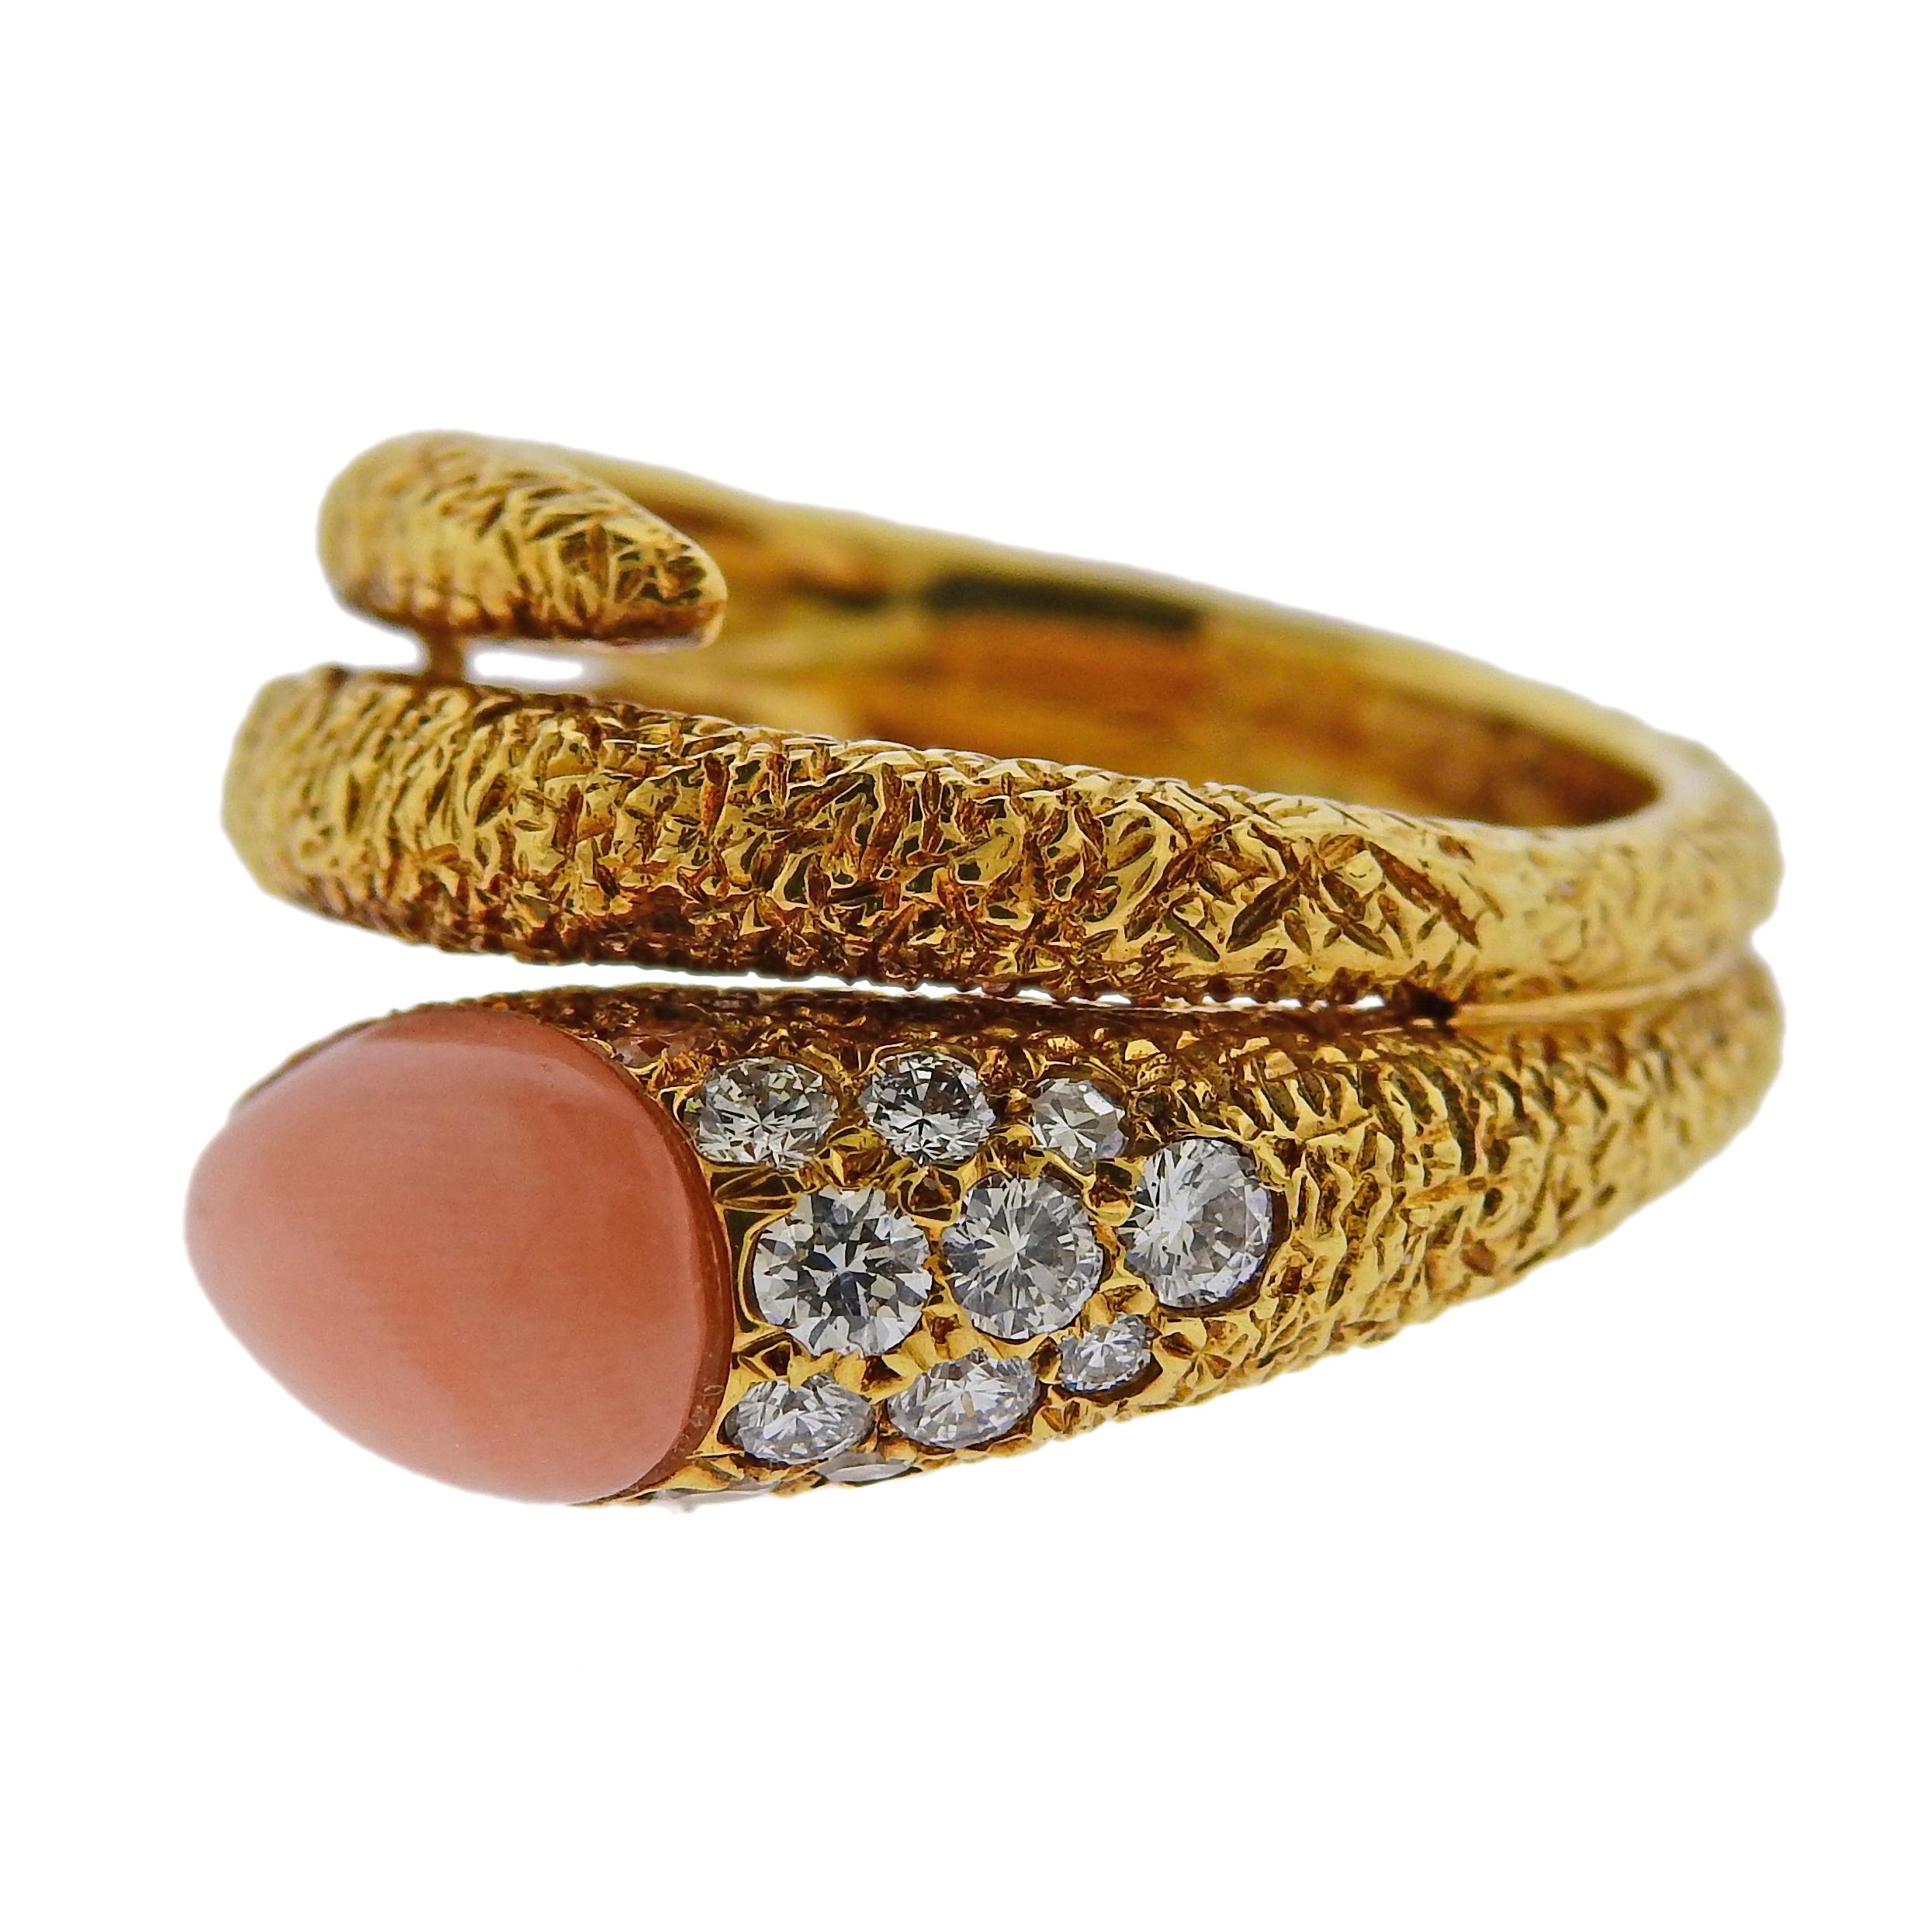 Van Cleef & Arpels 18k yellow gold ring with coral and approx. 0.46ctw in VVS-VS/FG diamonds.  Ring size - 5.75, ring top is 15mm wide. Weighs 9.8 grams. Marked: V.C.A, OCT42, C5158K1, 18k. 